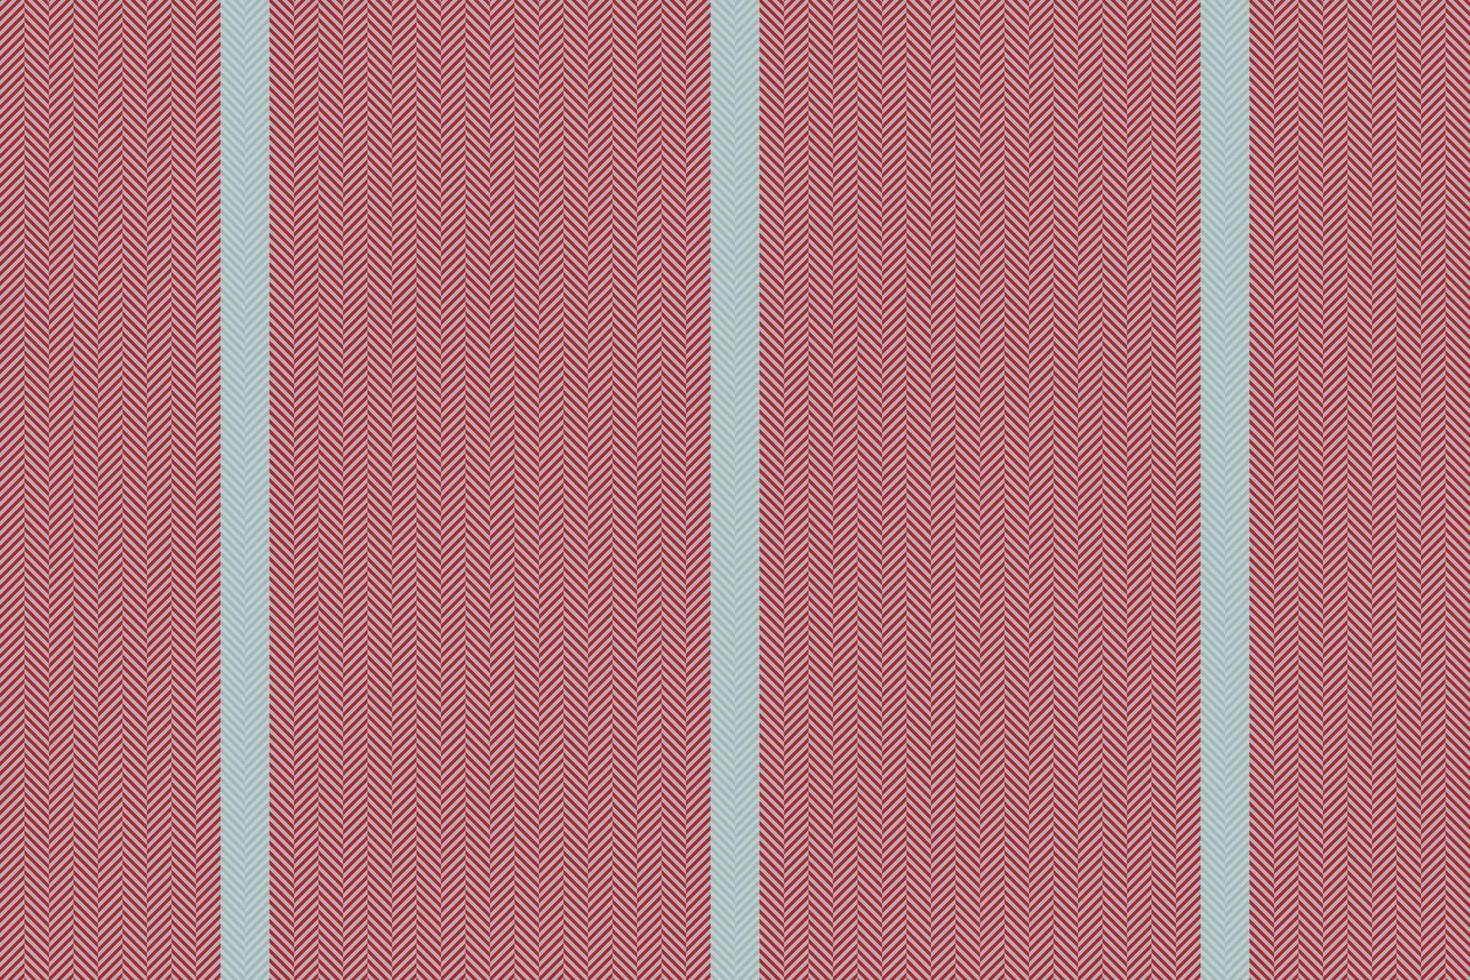 Fabric lines stripe. Vertical seamless background. Texture textile pattern vector. vector